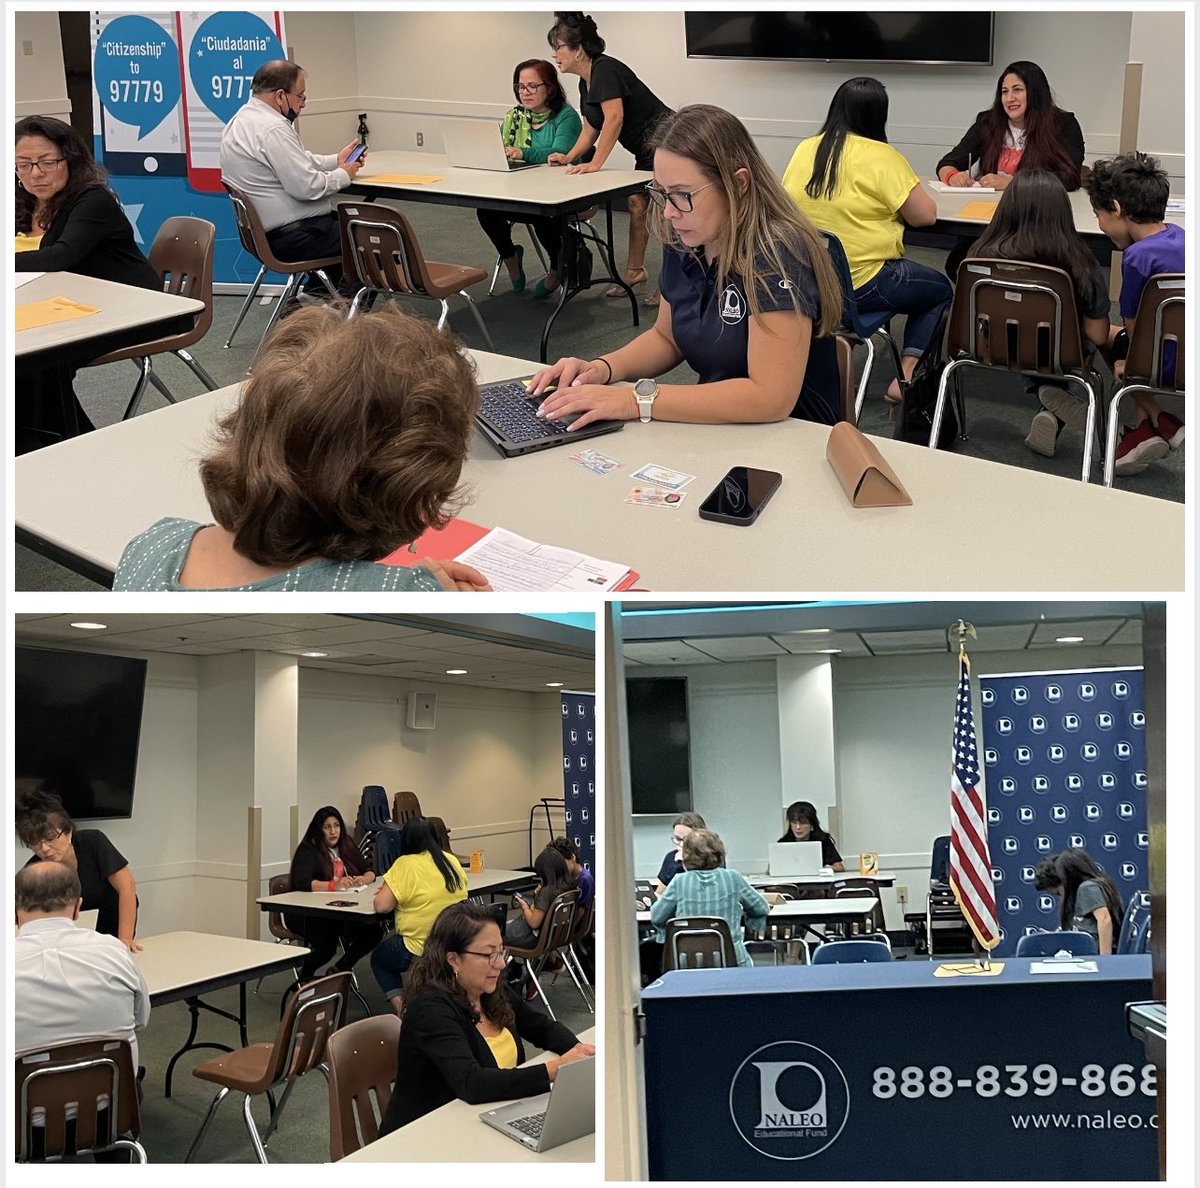 @NALEO is committed to helping the more than 4 Million Latinos eligible to attain U.S. Citizenship to start their journey towards naturalization through information dissemination &amp;  application assistance. Thanks to @JackieJcolon &amp; @Jenny__Ash for leading this work in Florida. https://t.co/onsGOAa7E3